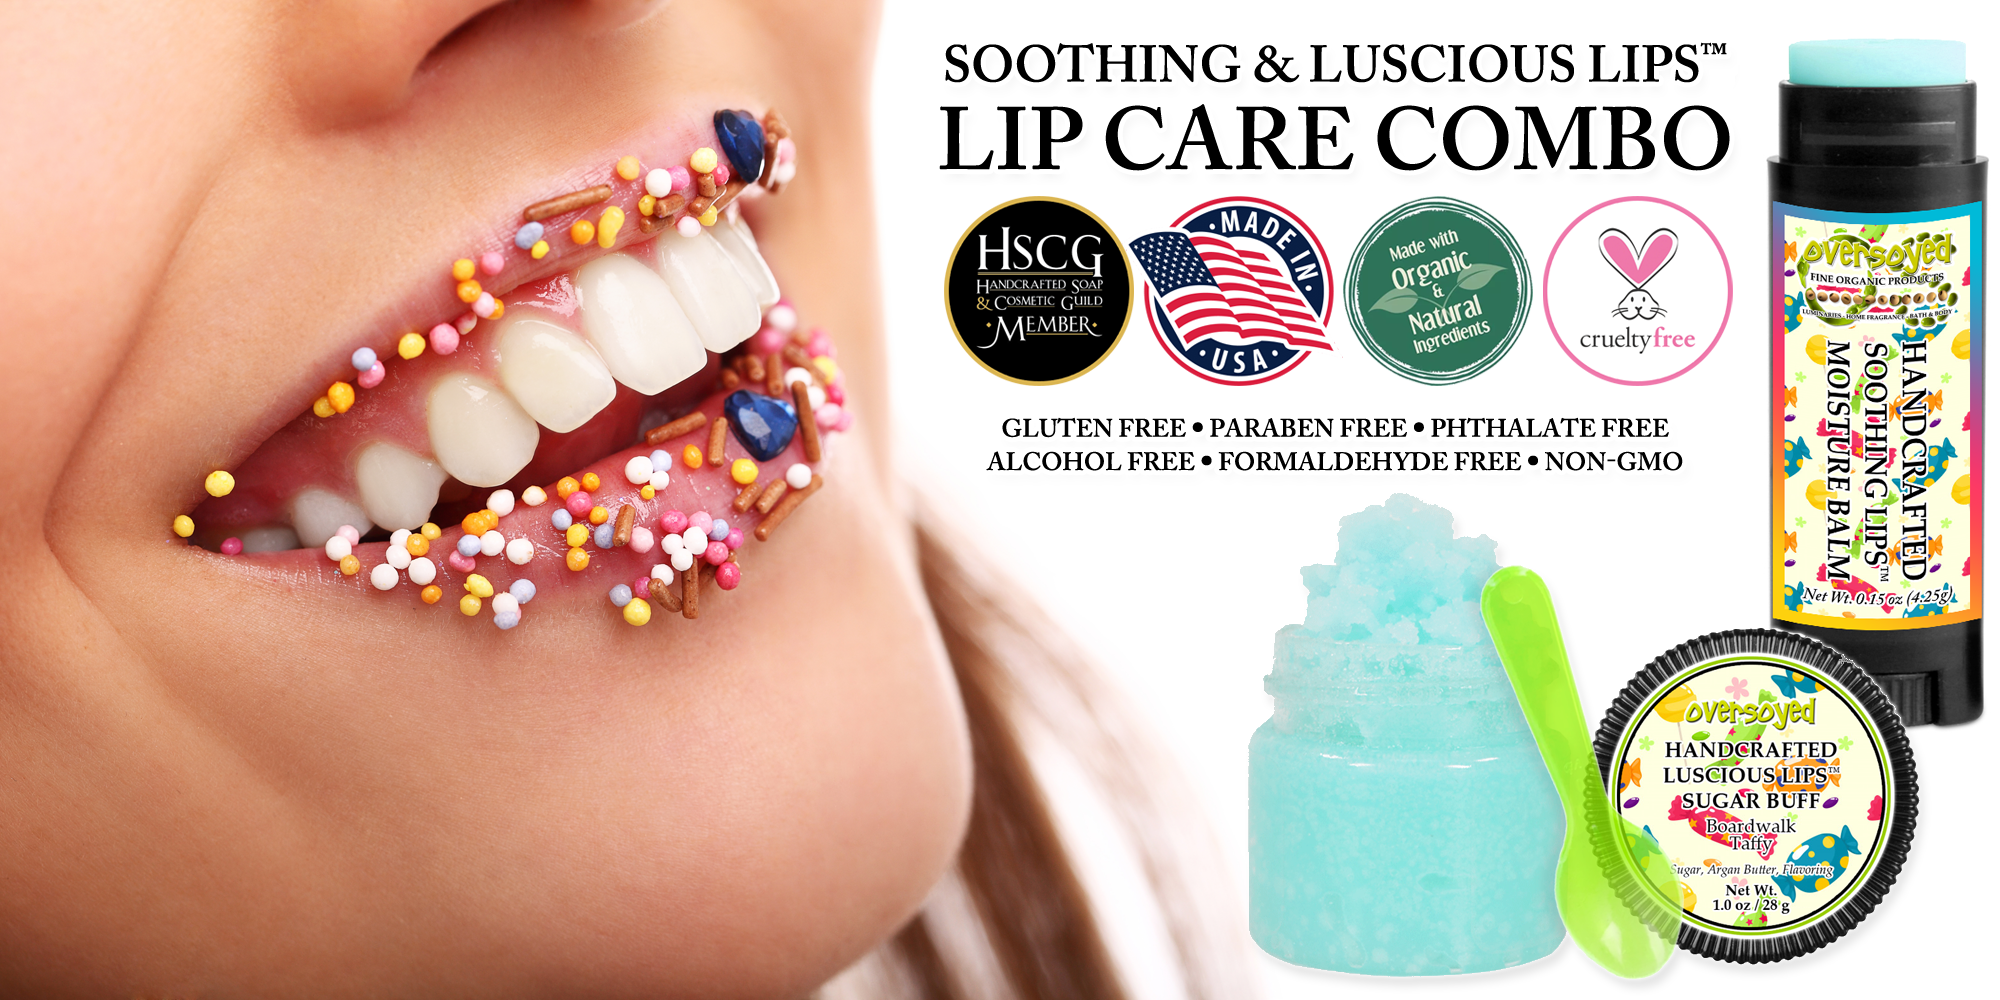 OverSoyed Fine Organic Products - Soothing & Luscious Lips™ Lip Care Combo